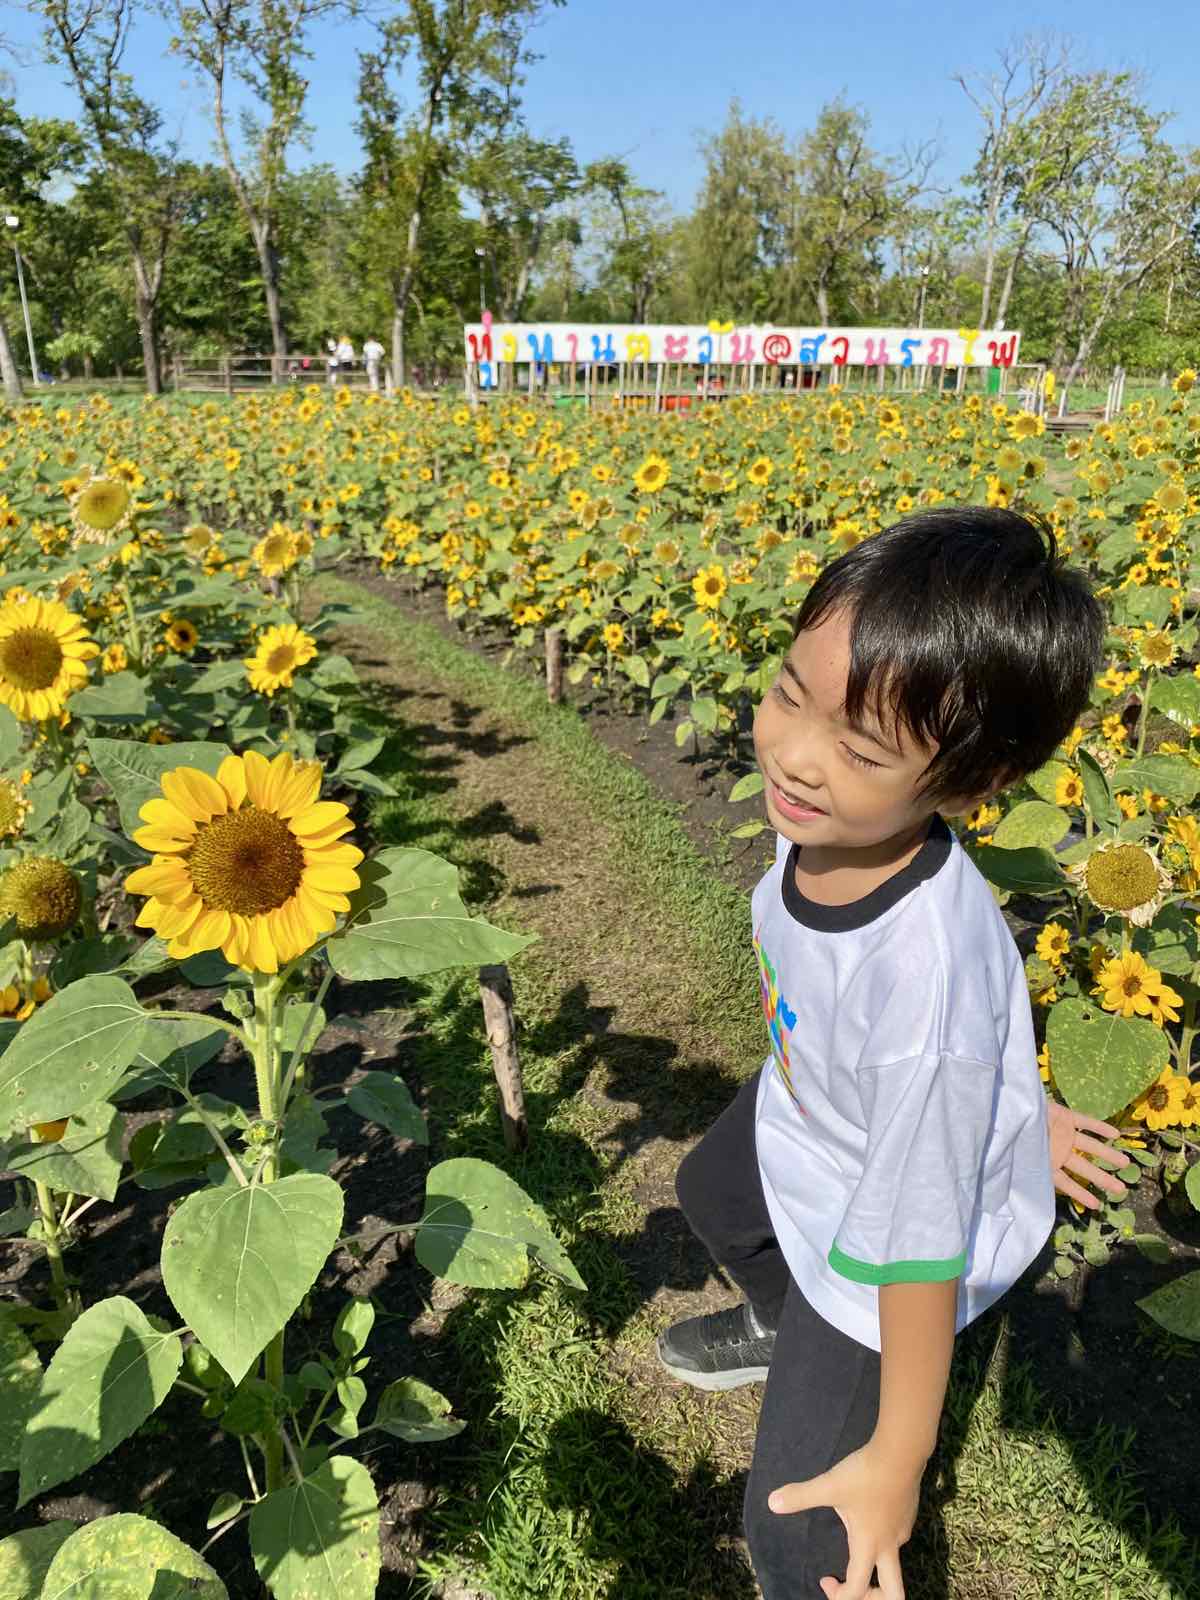 Little boy smiling at a sunflower